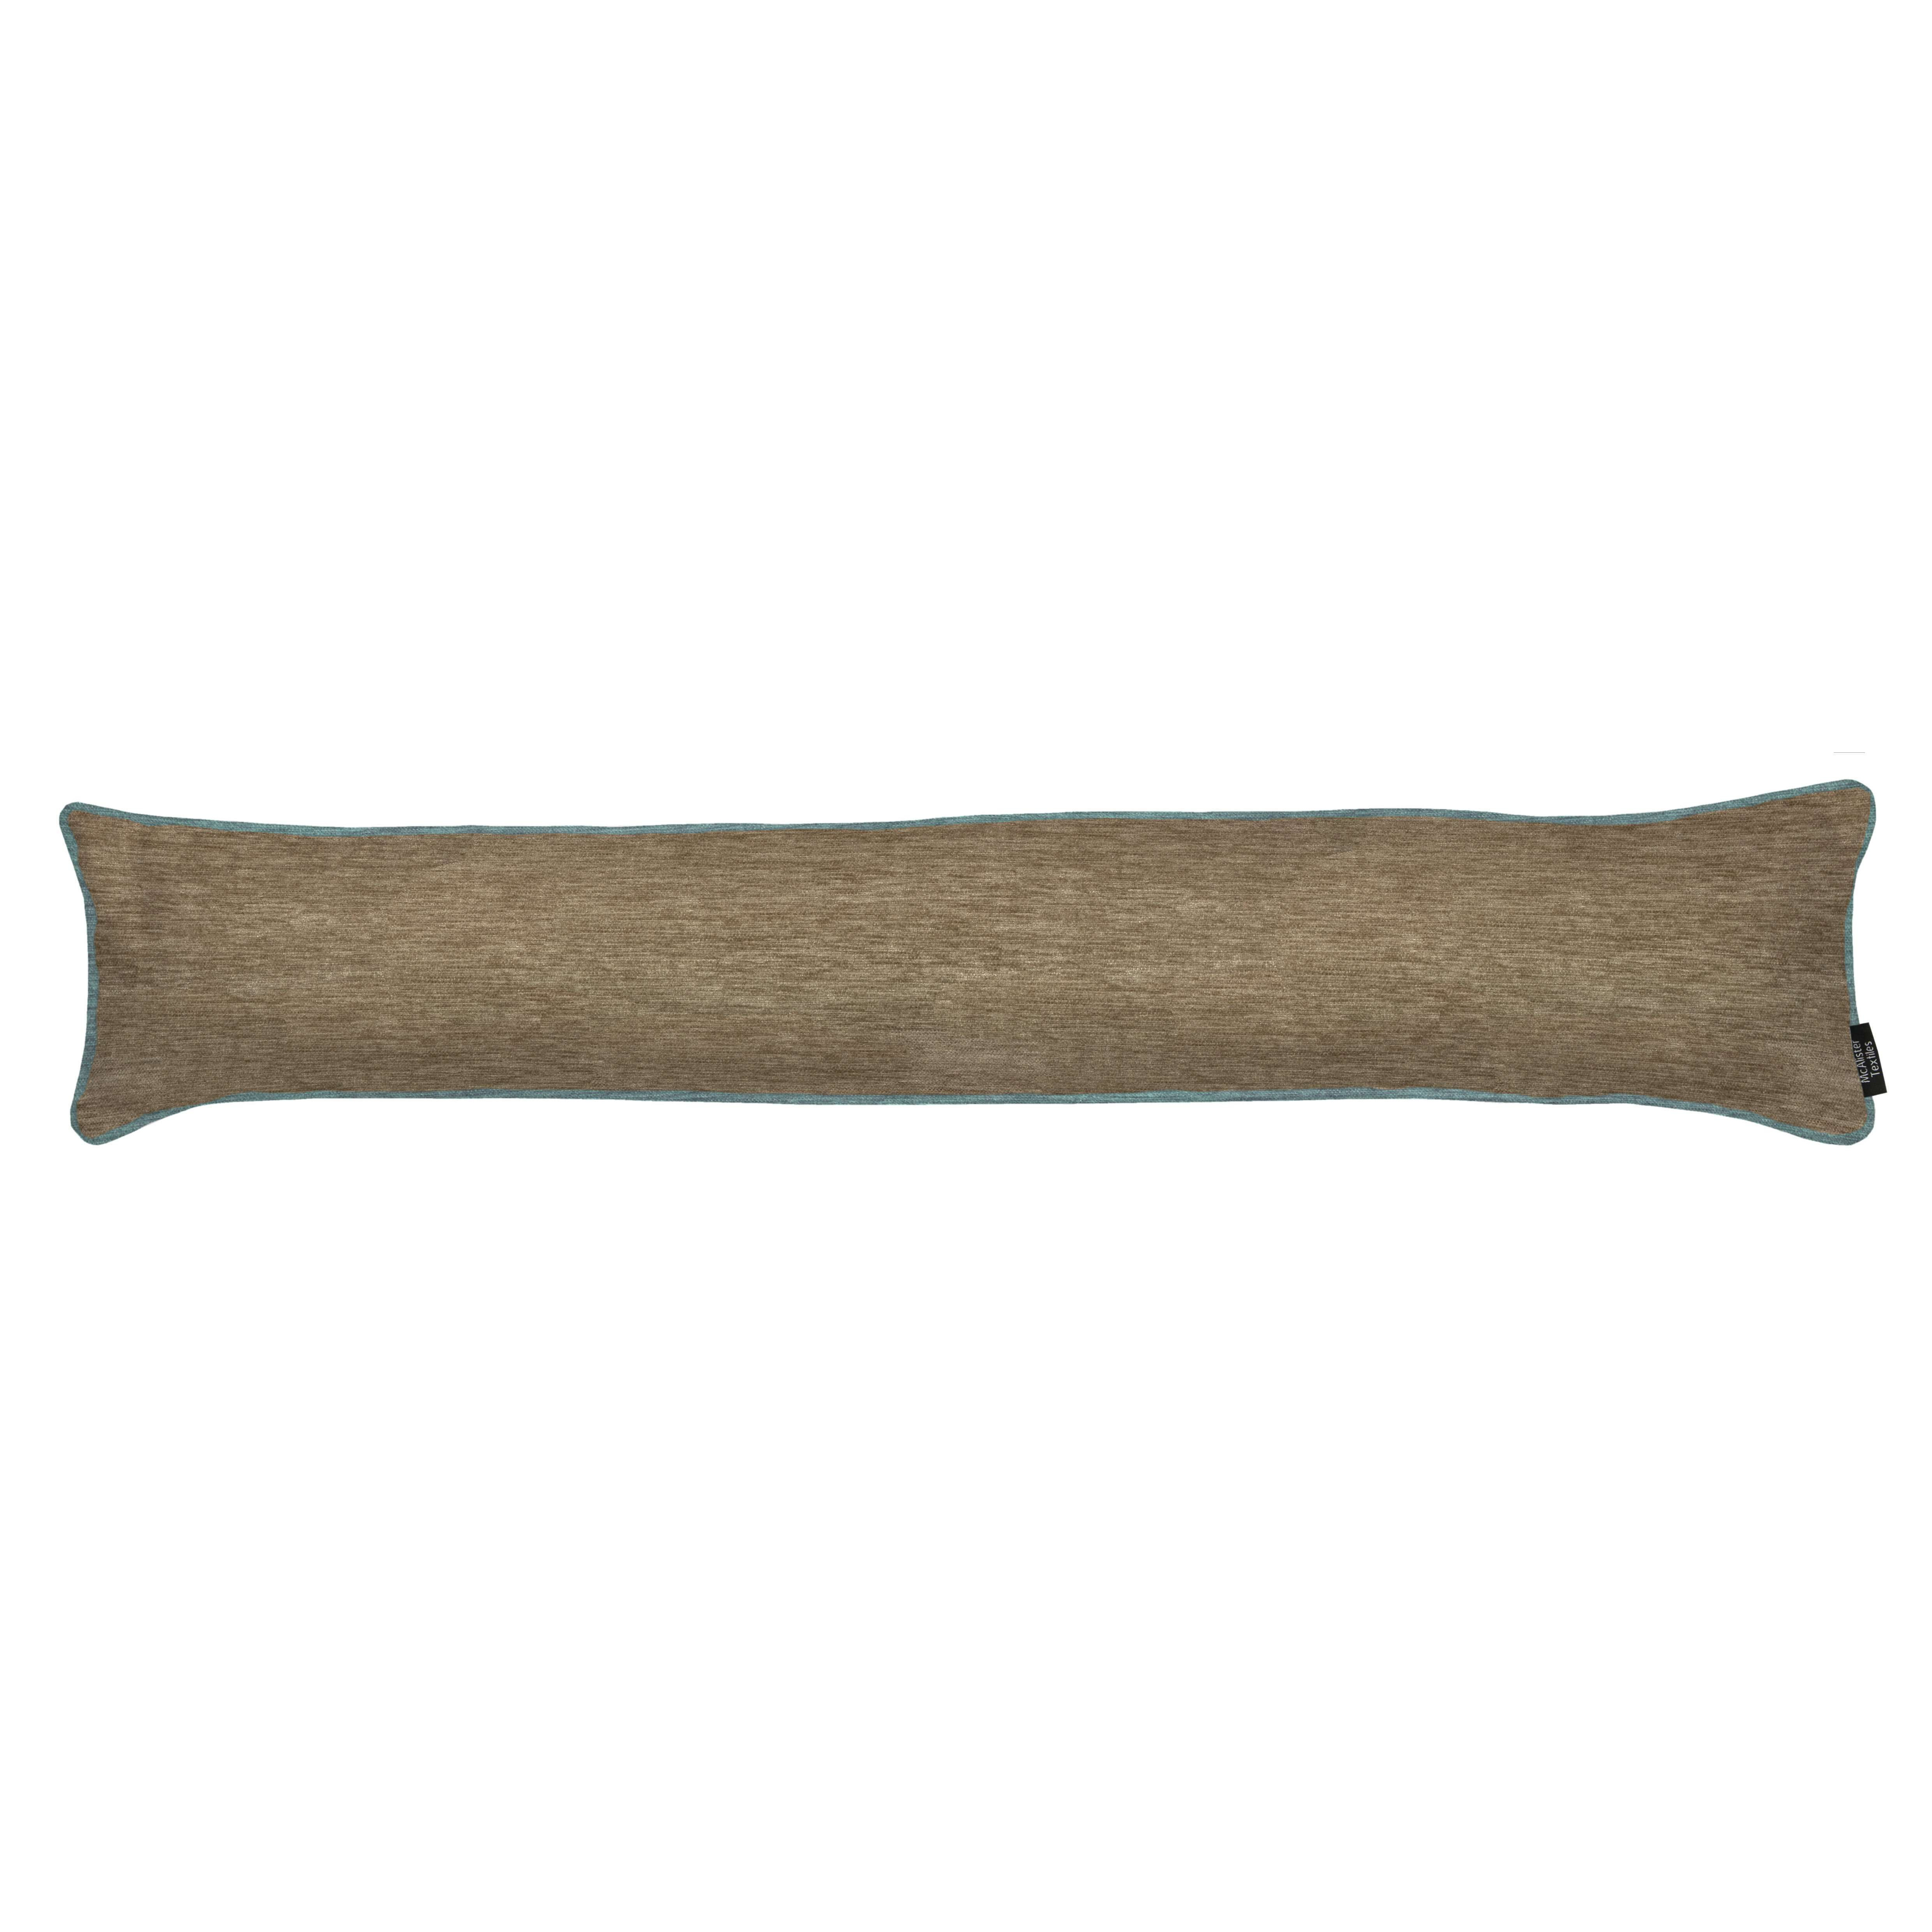 Plain Chenille Contrast Piped Beige + Blue Draught Excluder, 18cm x 100cm